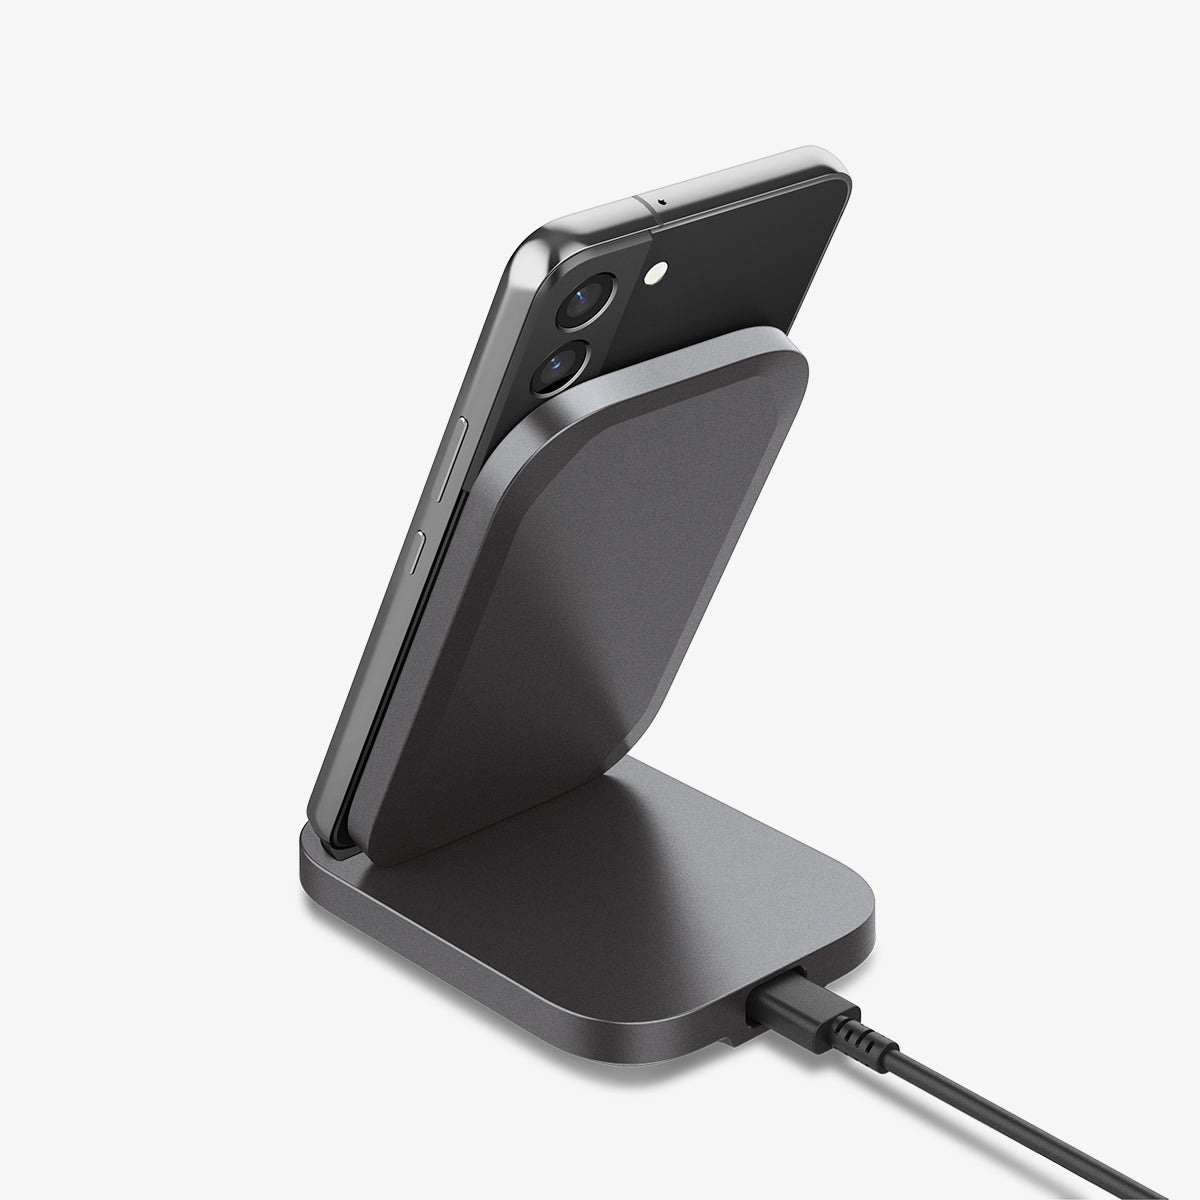 ACH06254 - ArcField PF2102 Wireless Charger in black showing the back with wireless charger plugged in